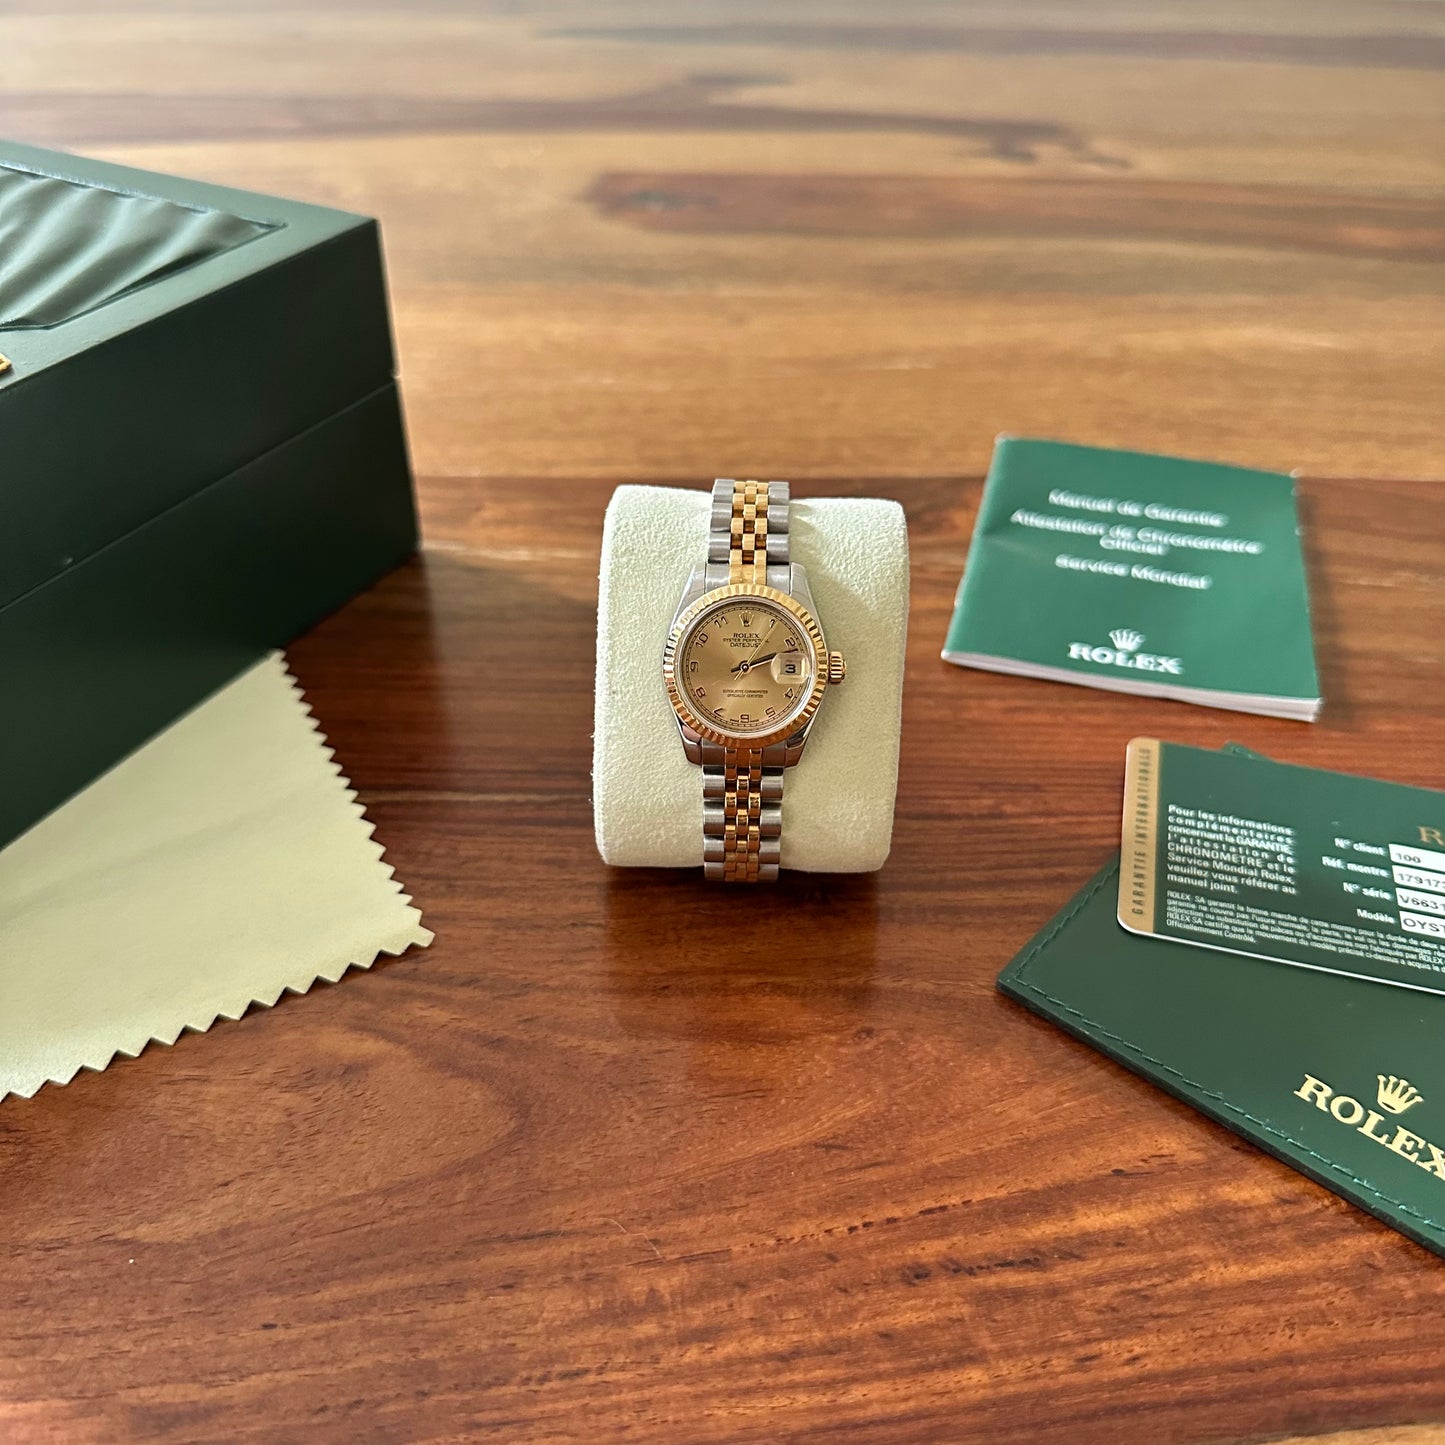 Rolex Datejust 26mm in Stainless Steel and Gold